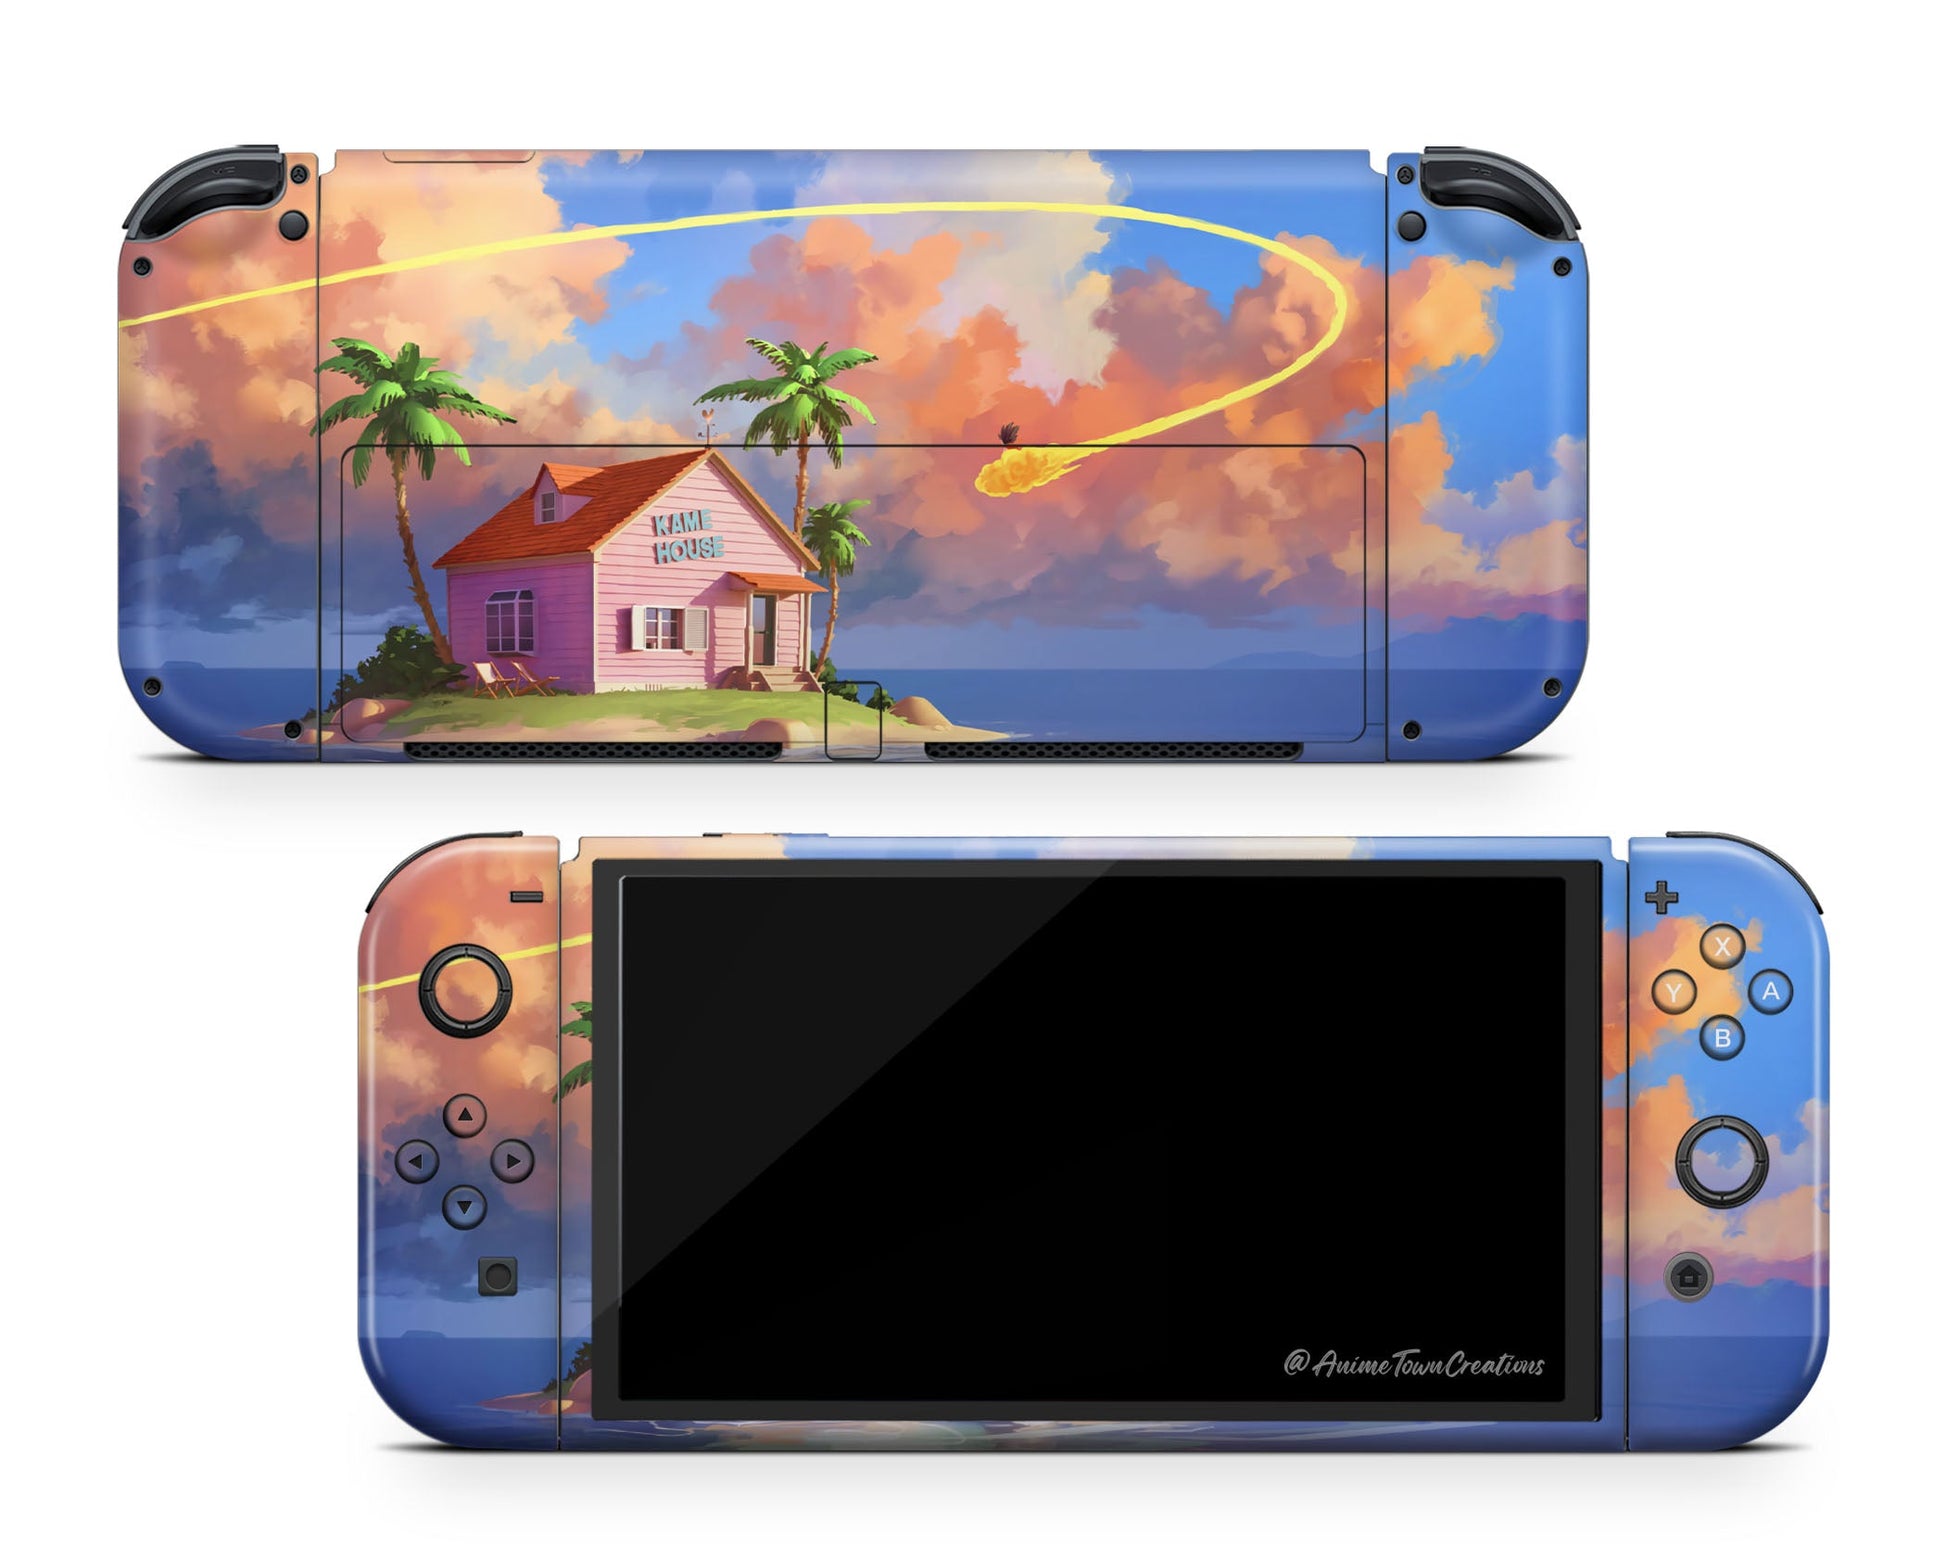 Anime Town Creations Nintendo Switch OLED Dragon Ball Kame House Vinyl +Tempered Glass Skins - Anime Dragon Ball Switch OLED Skin